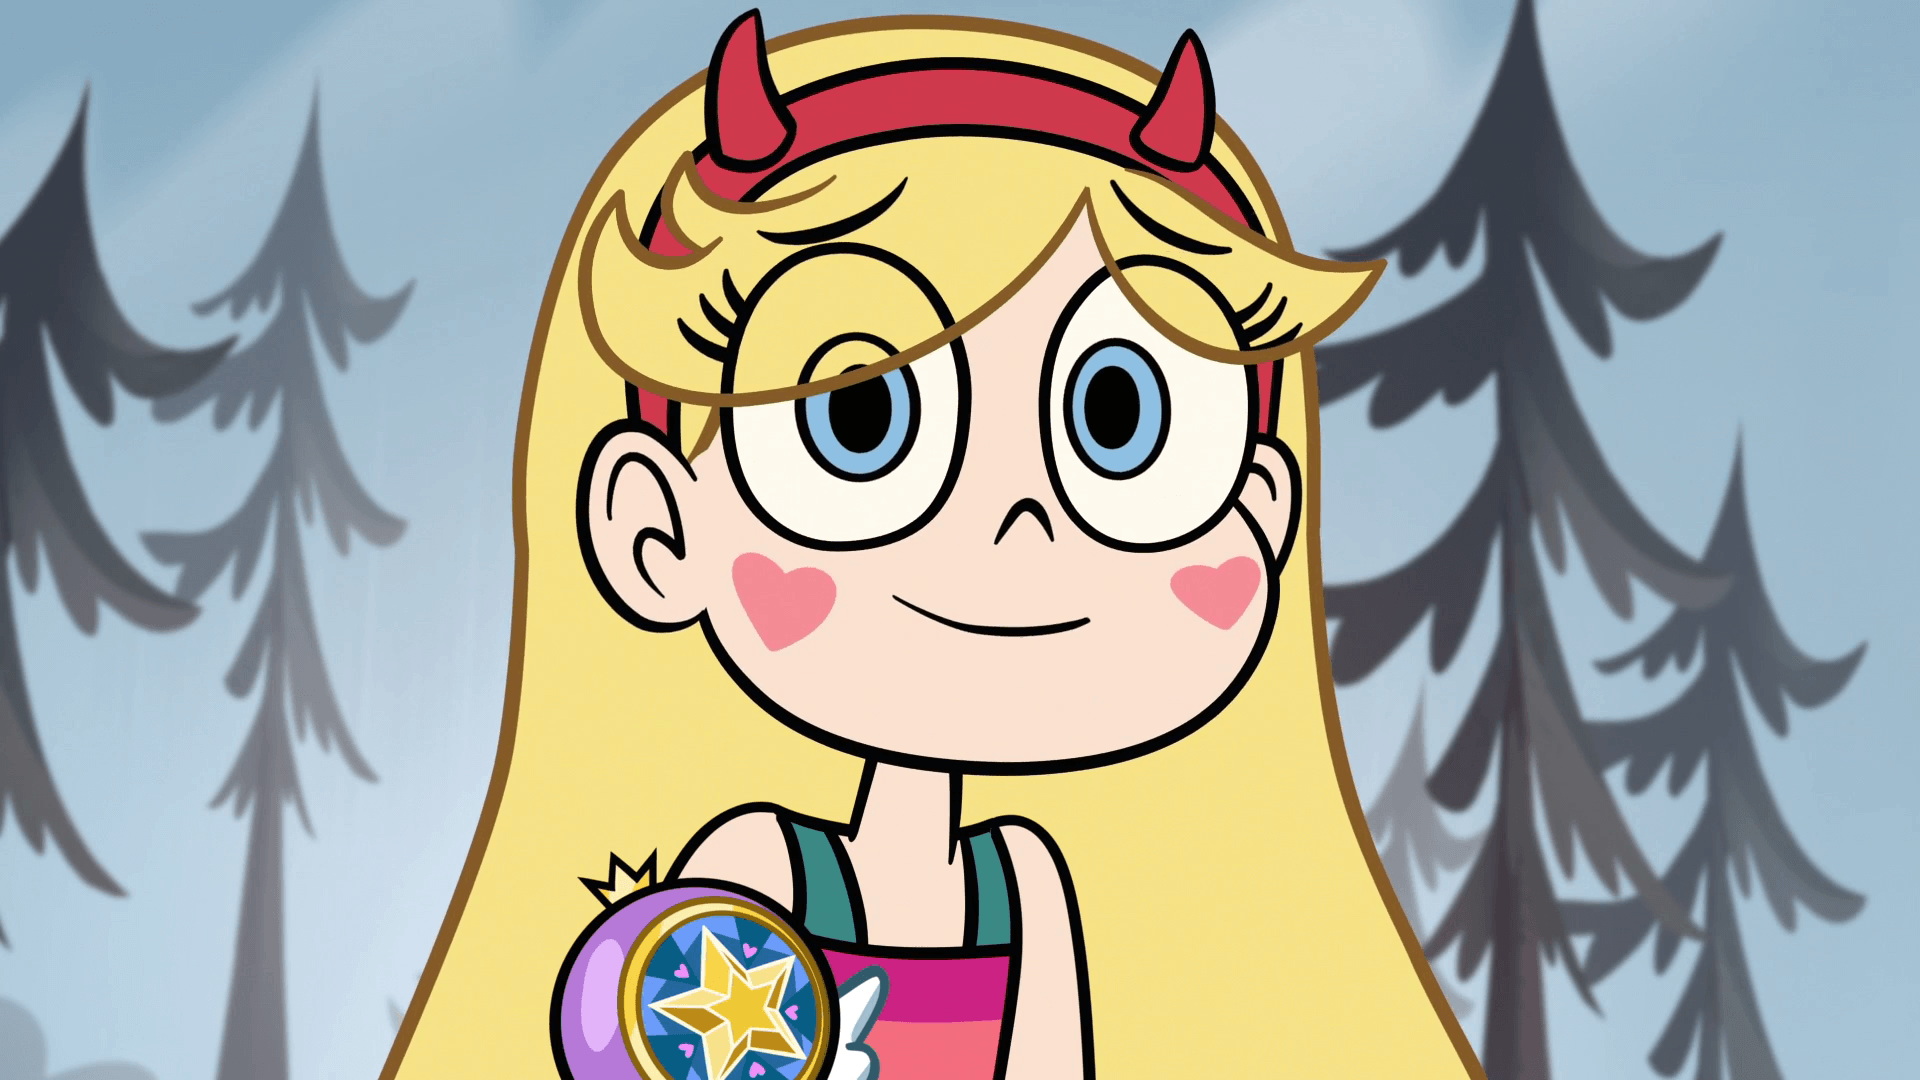 S1E6 Star smiling softly.png. Star vs. the Forces of Evil